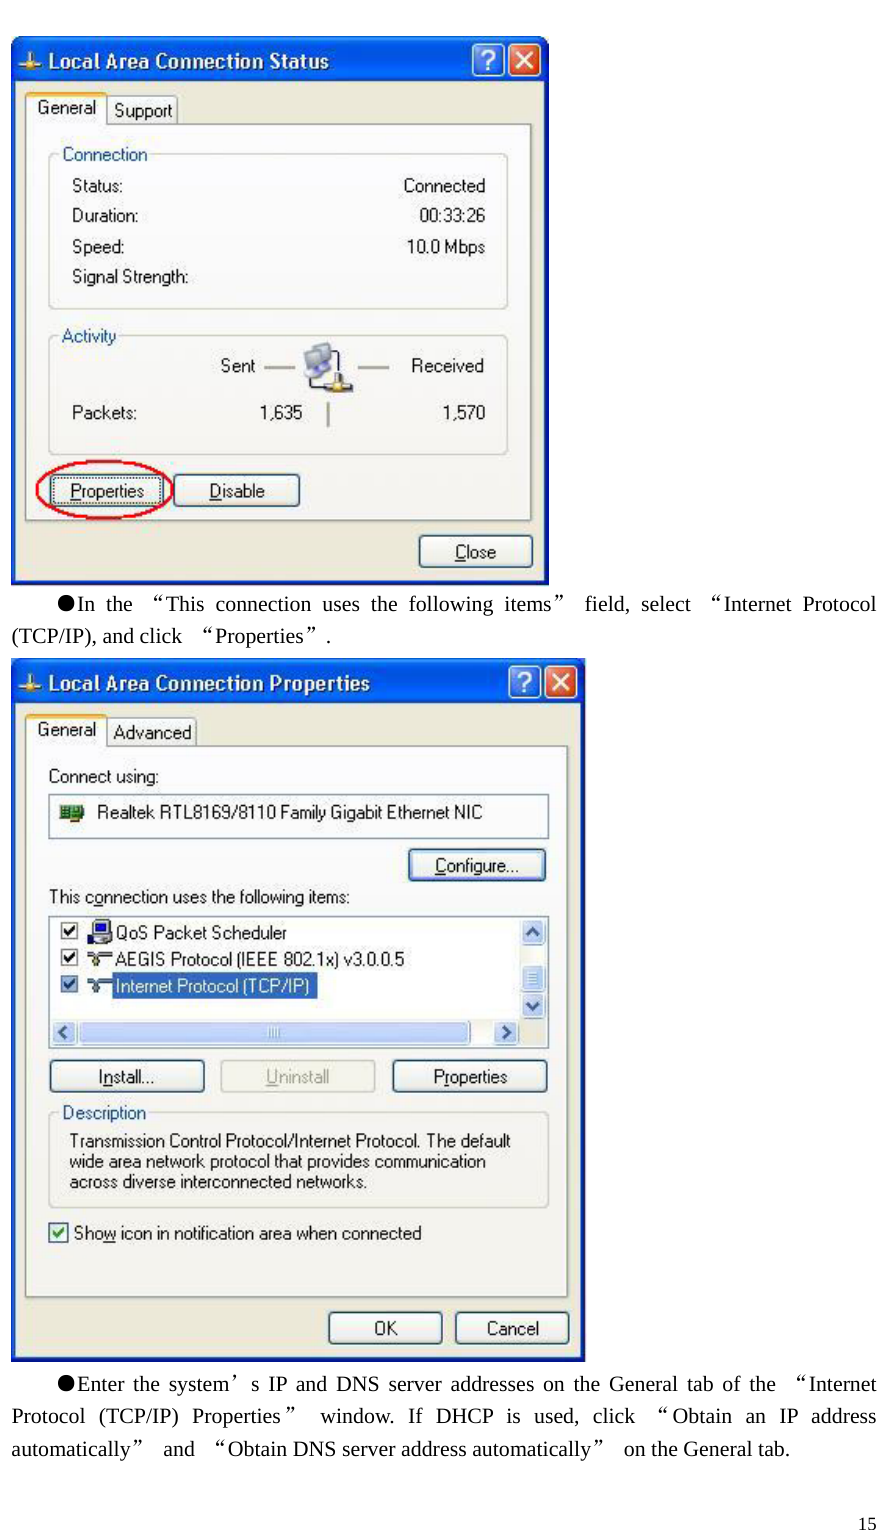   15 ●In the “This connection uses the following items” field, select “Internet Protocol (TCP/IP), and click  “Properties”.  ●Enter the system’s IP and DNS server addresses on the General tab of the “Internet Protocol (TCP/IP) Properties” window. If DHCP is used, click “Obtain an IP address automatically” and “Obtain DNS server address automatically”  on the General tab. 